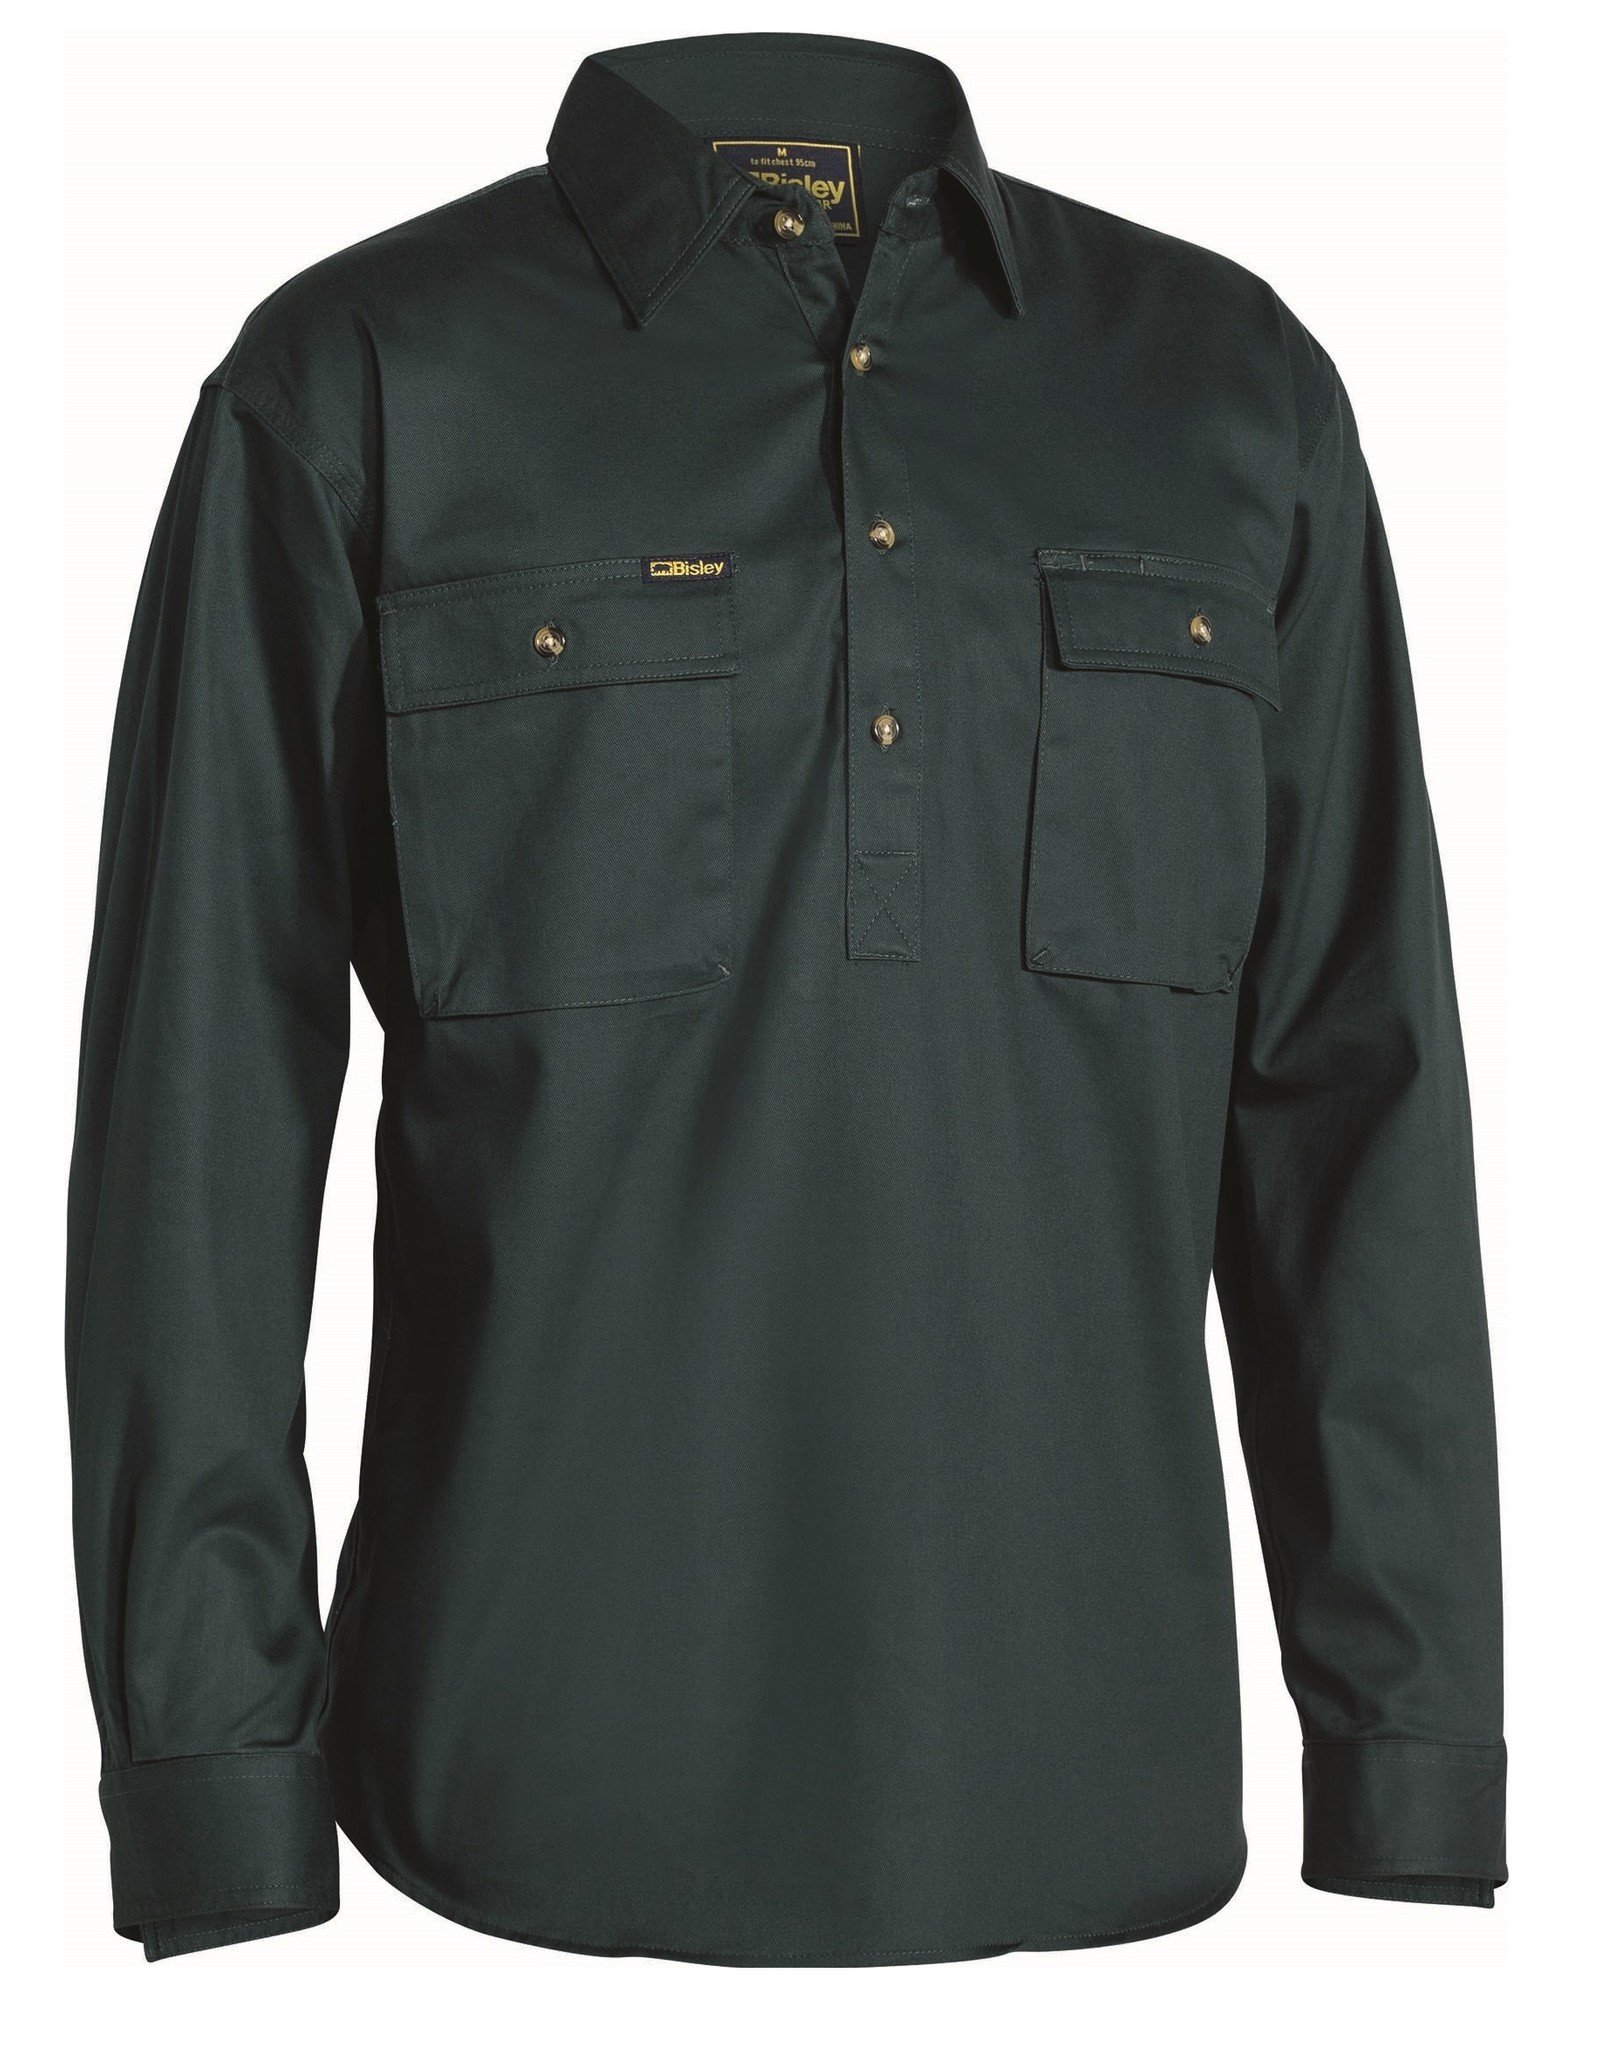 Bisley Bisley BSC6433 Cotton Drill Closed Front LS Work Shirt